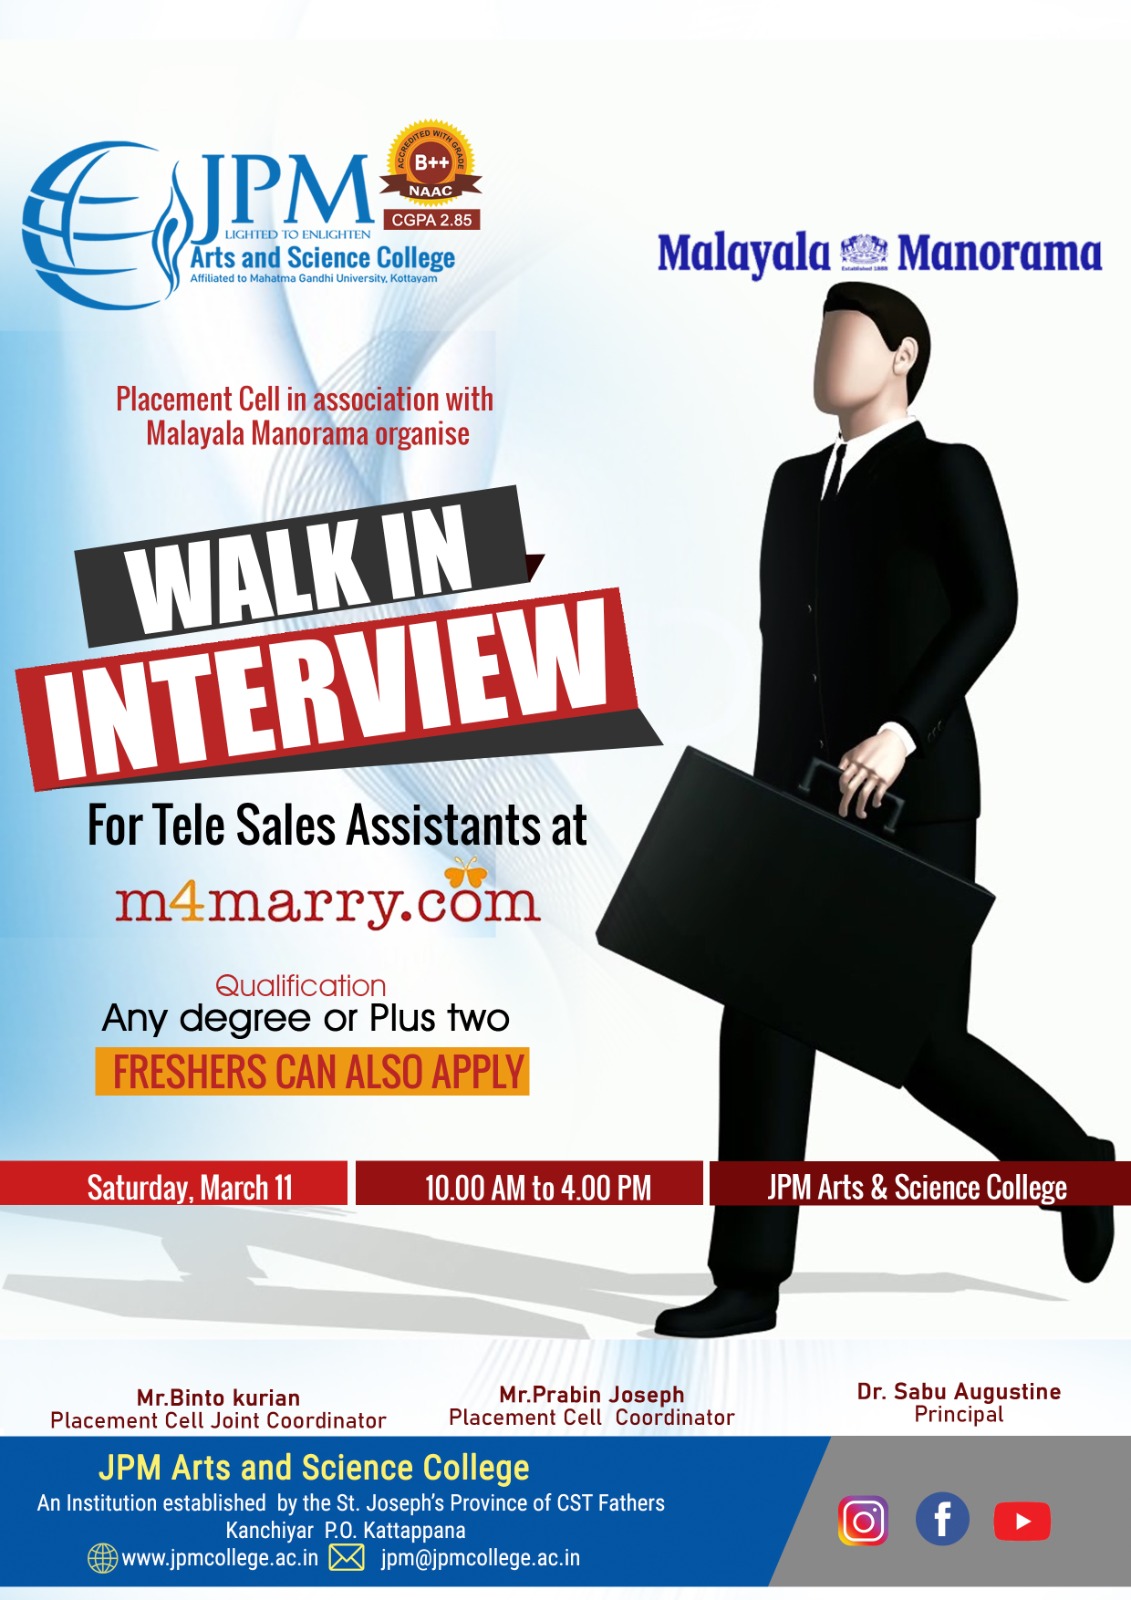 Walk-in-Interview for Tele Sales Assistants